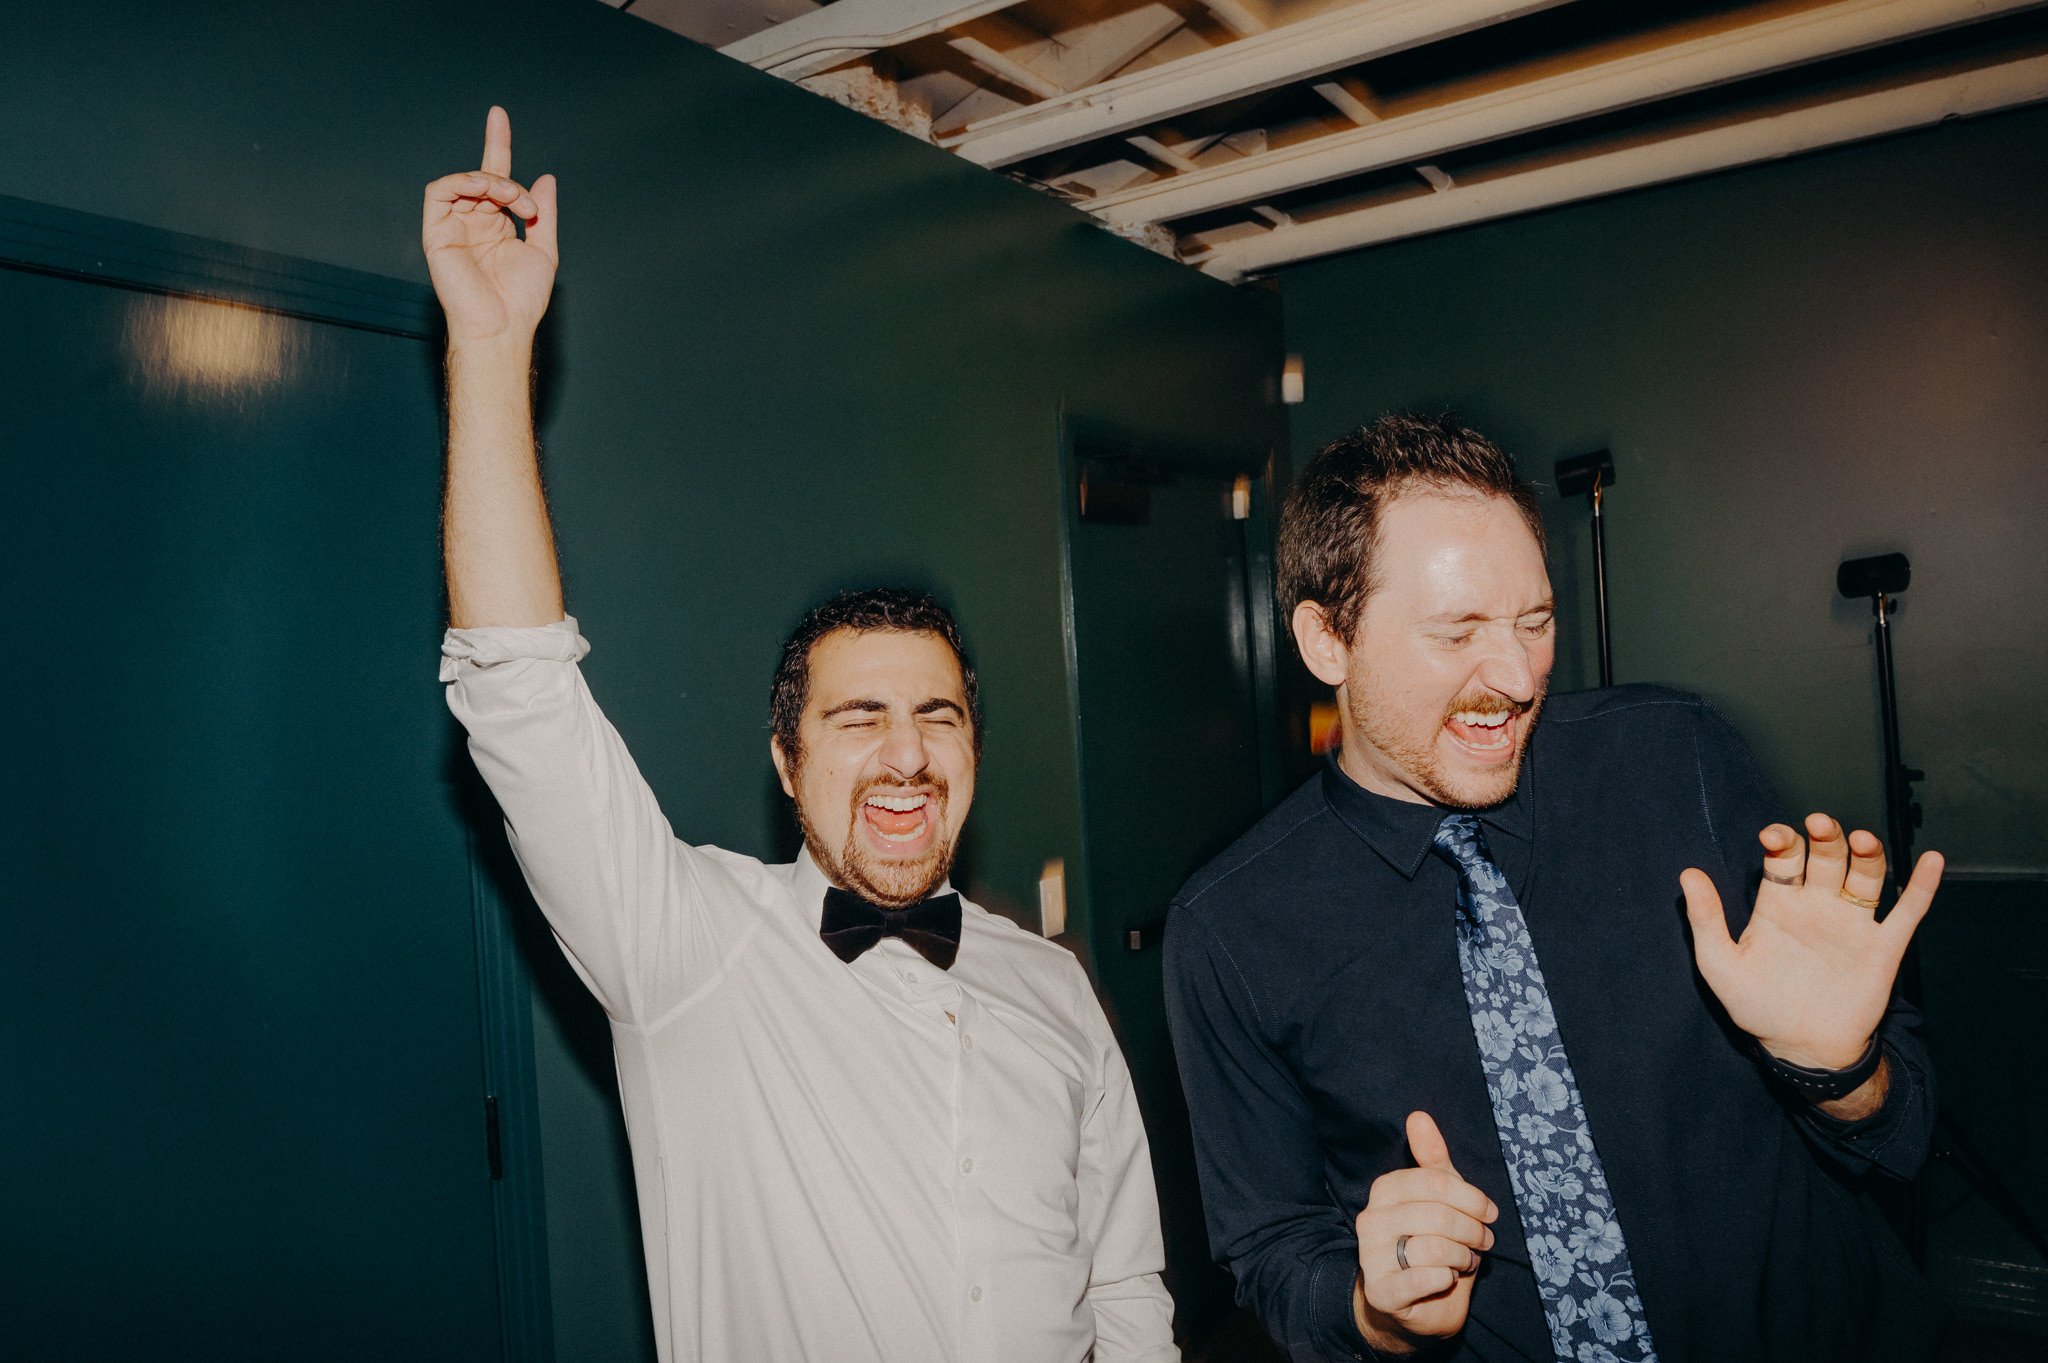 the fig house wedding - queer wedding photographers in los angeles - itlaphoto.com-141.jpg